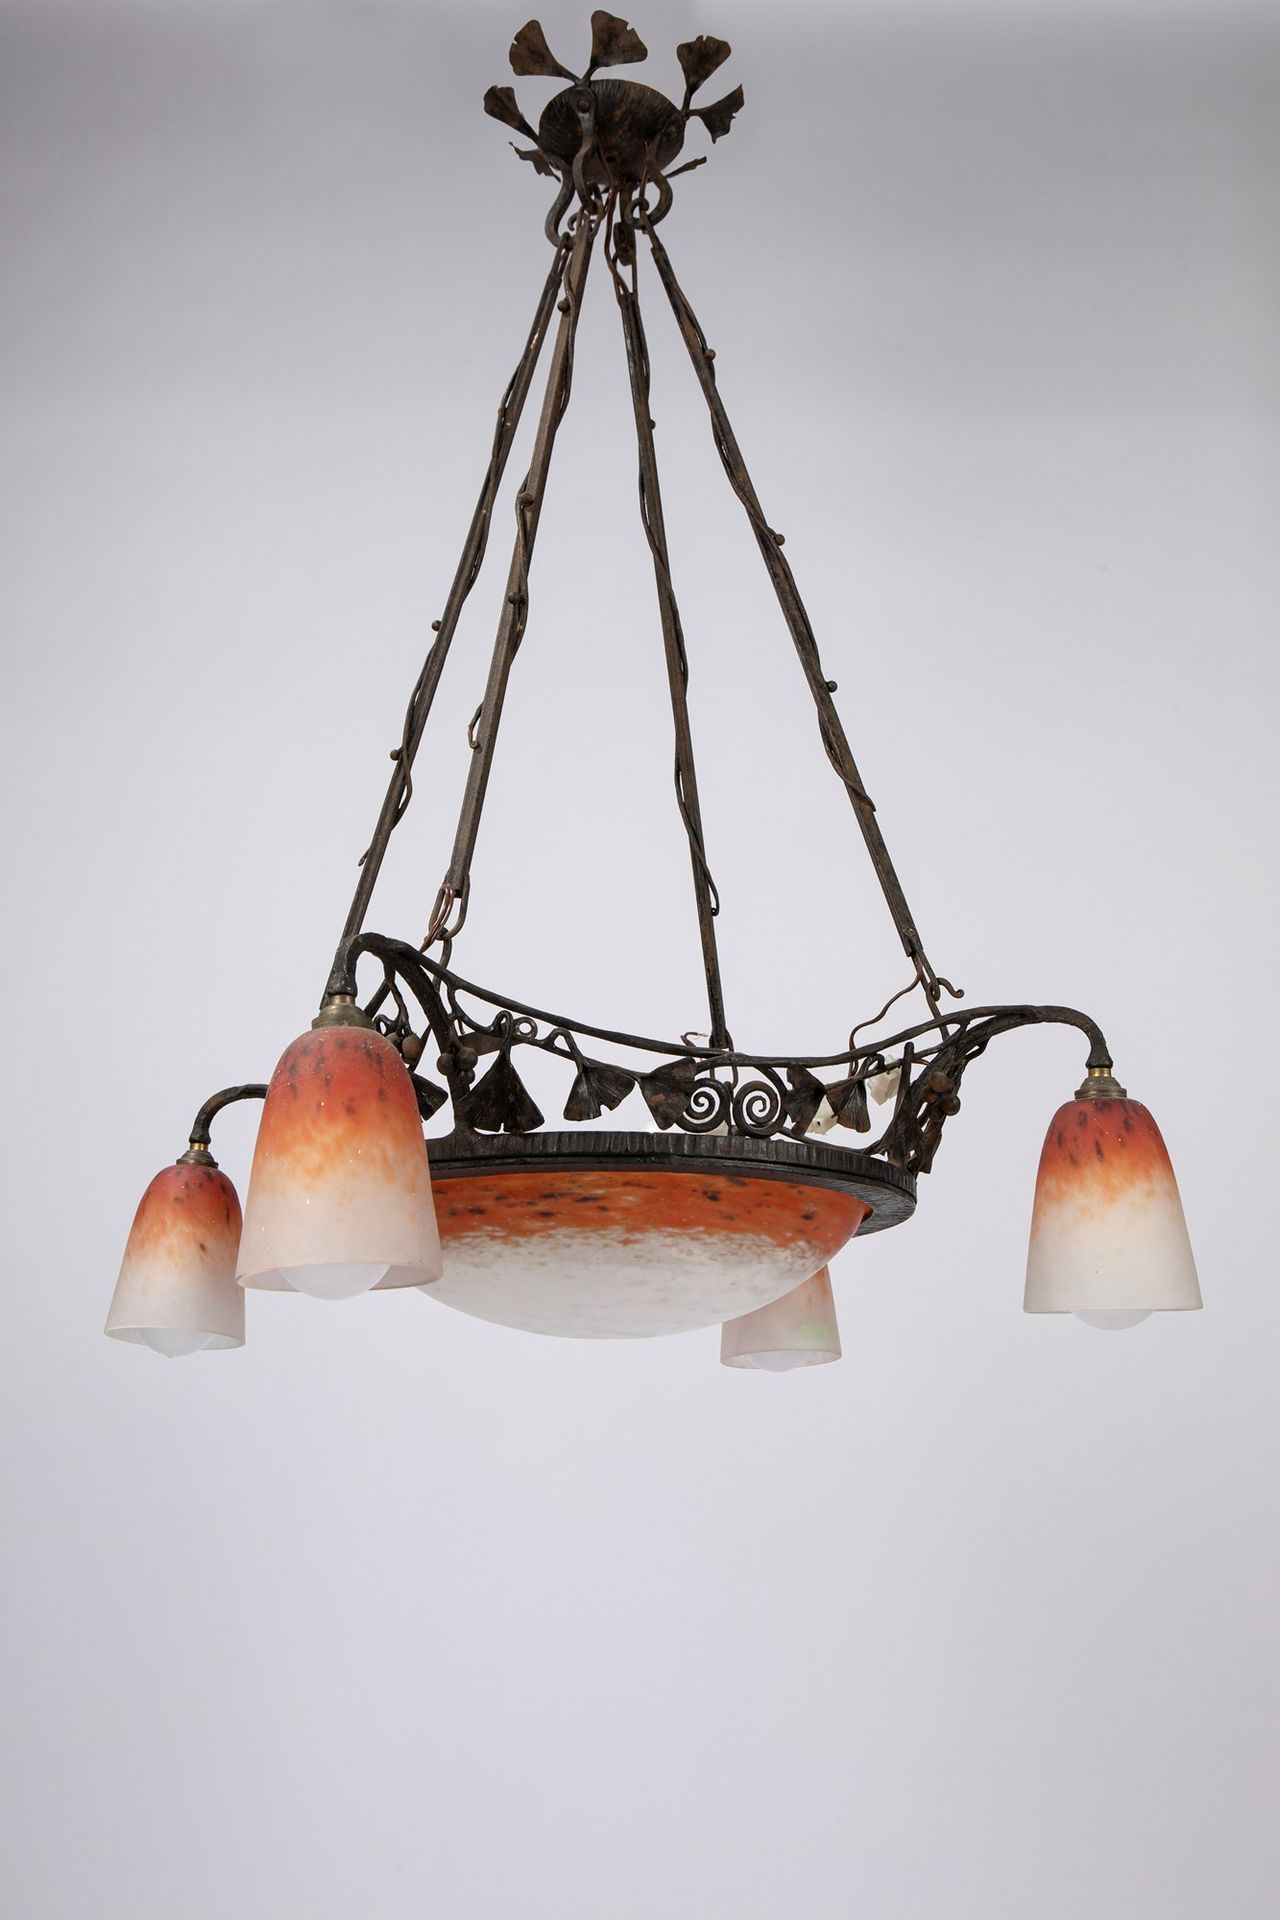 Manifattura Francese Chandelier, 1920 ca.

Cm diam 80
wrought iron and glass pas&hellip;